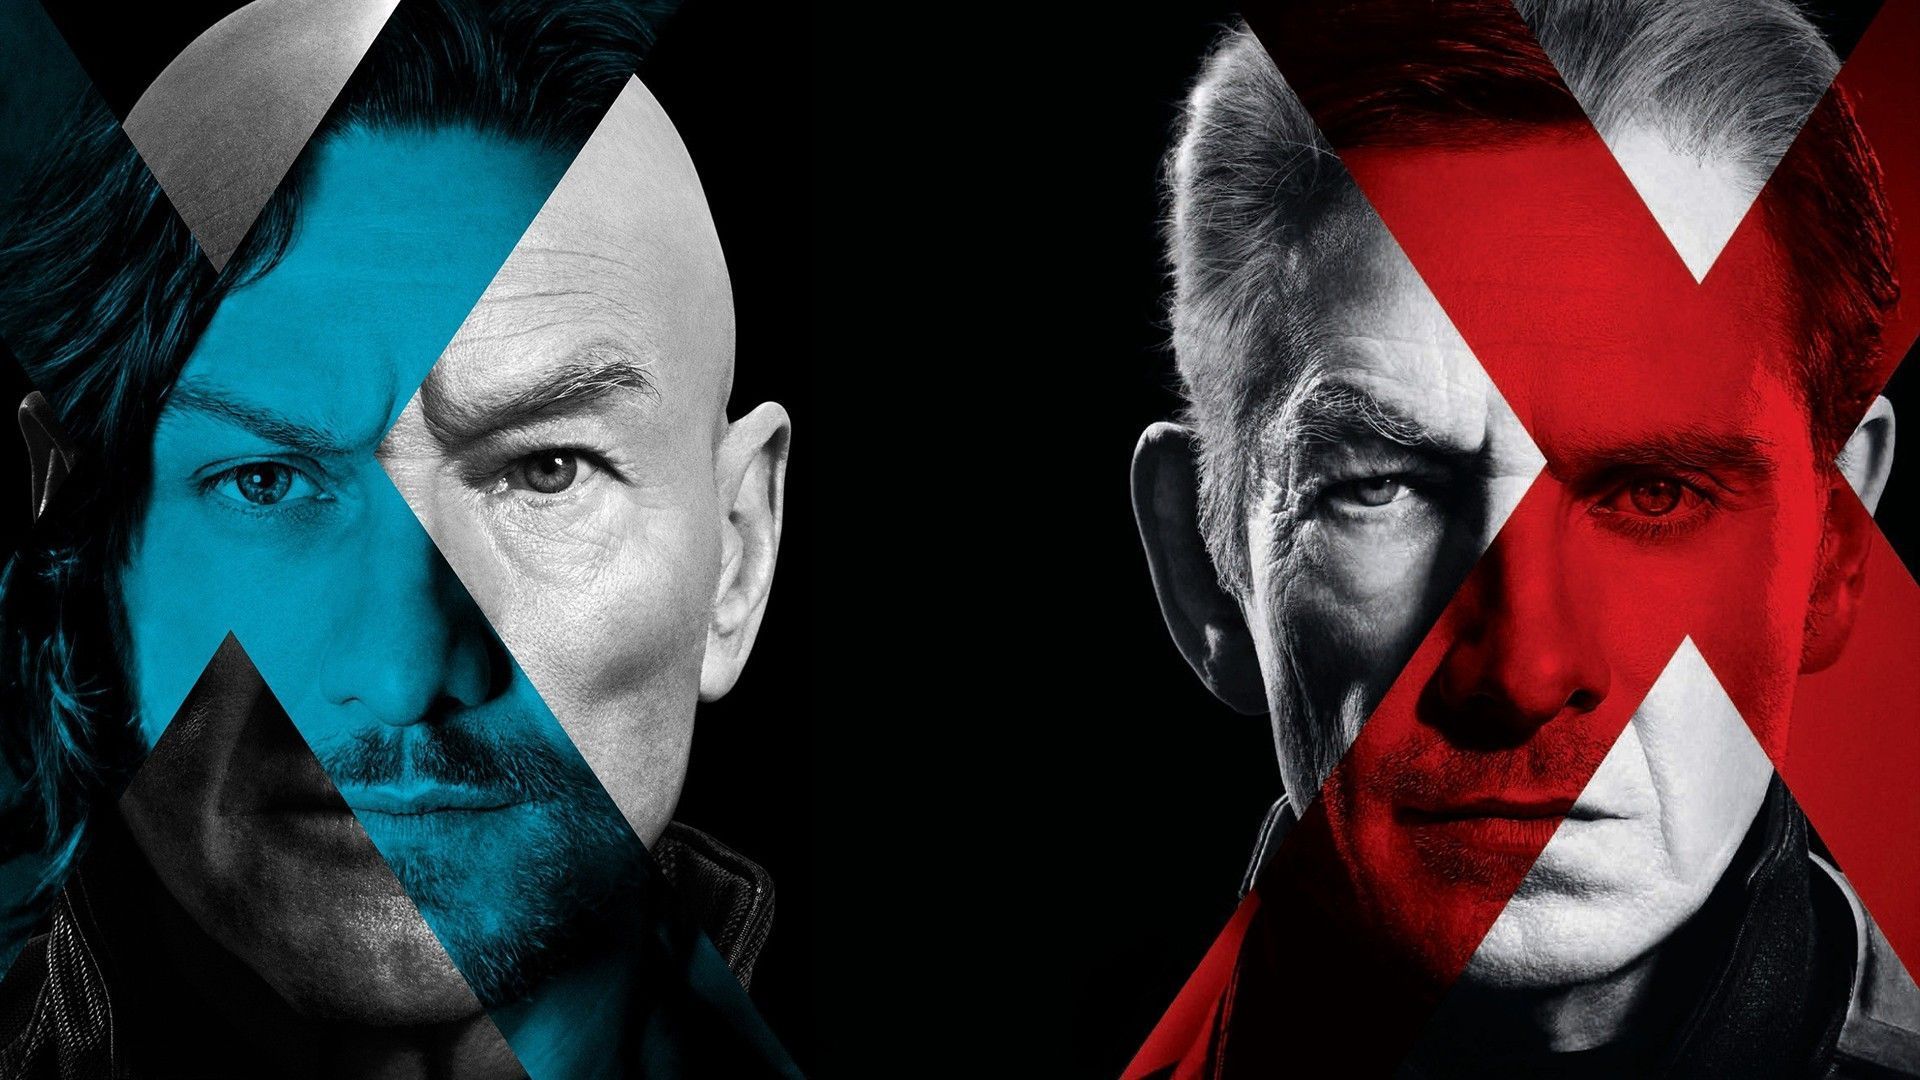 X-Men Days of Future Past Wallpapers and Images | Cool Wallpapers